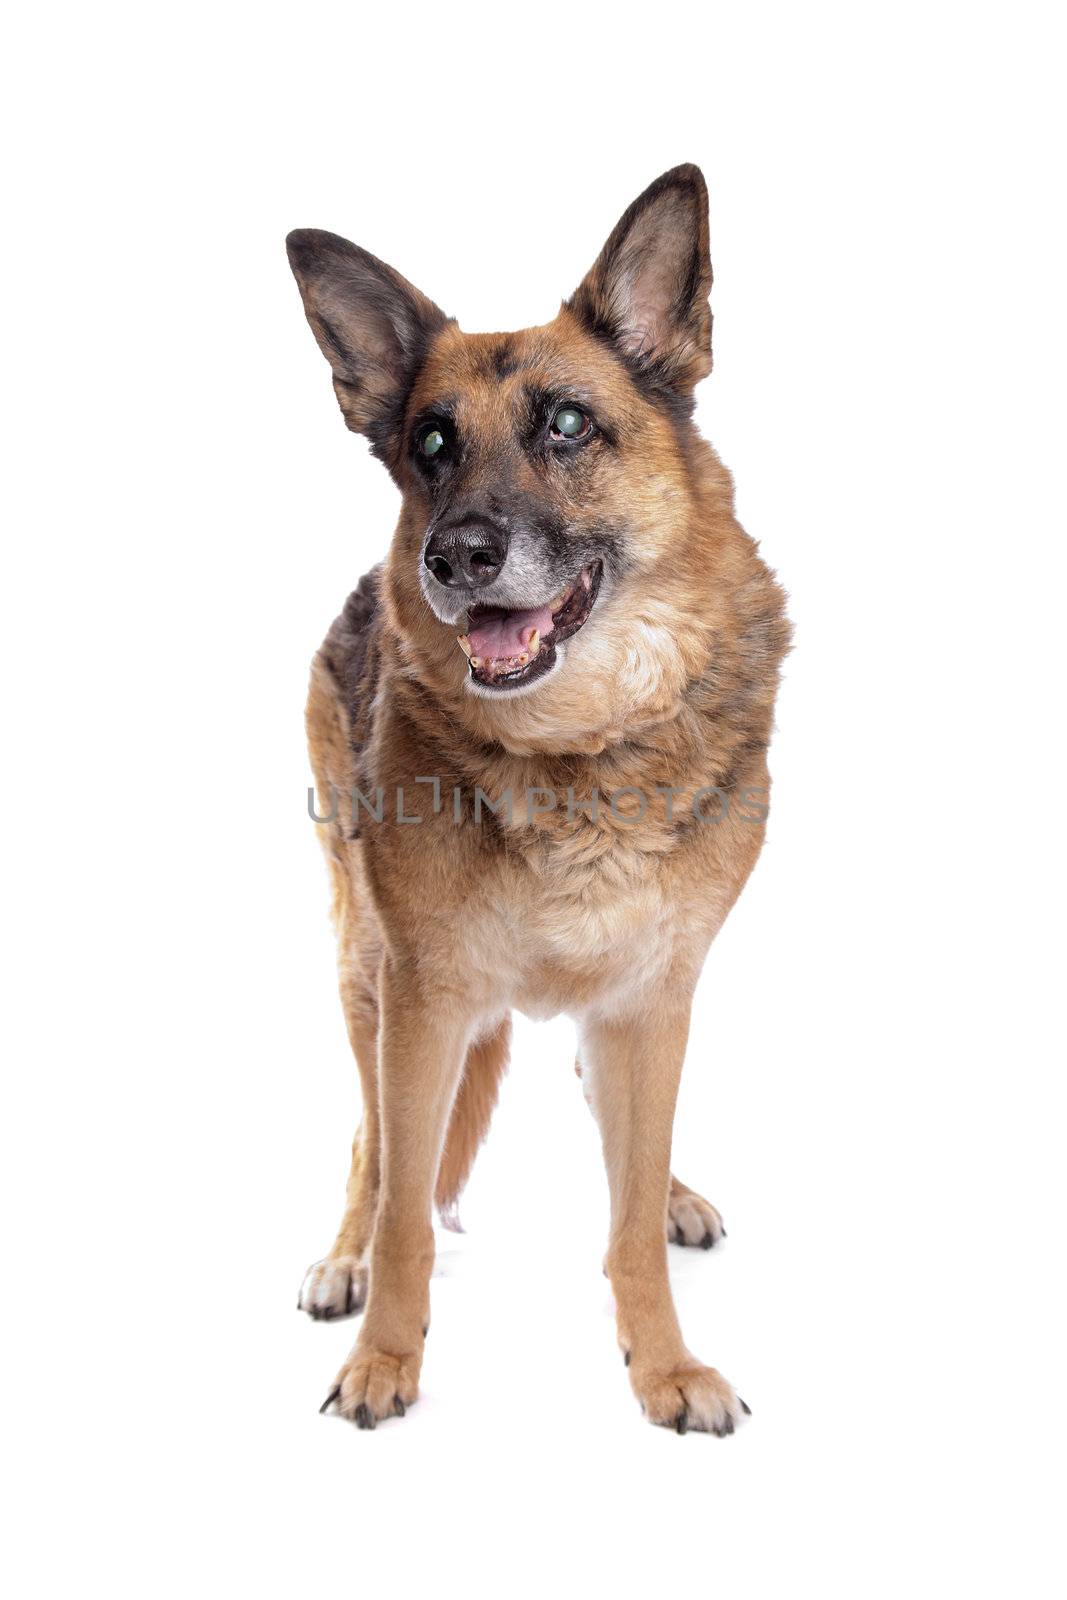 Old and blind German shepherd in front of a white background